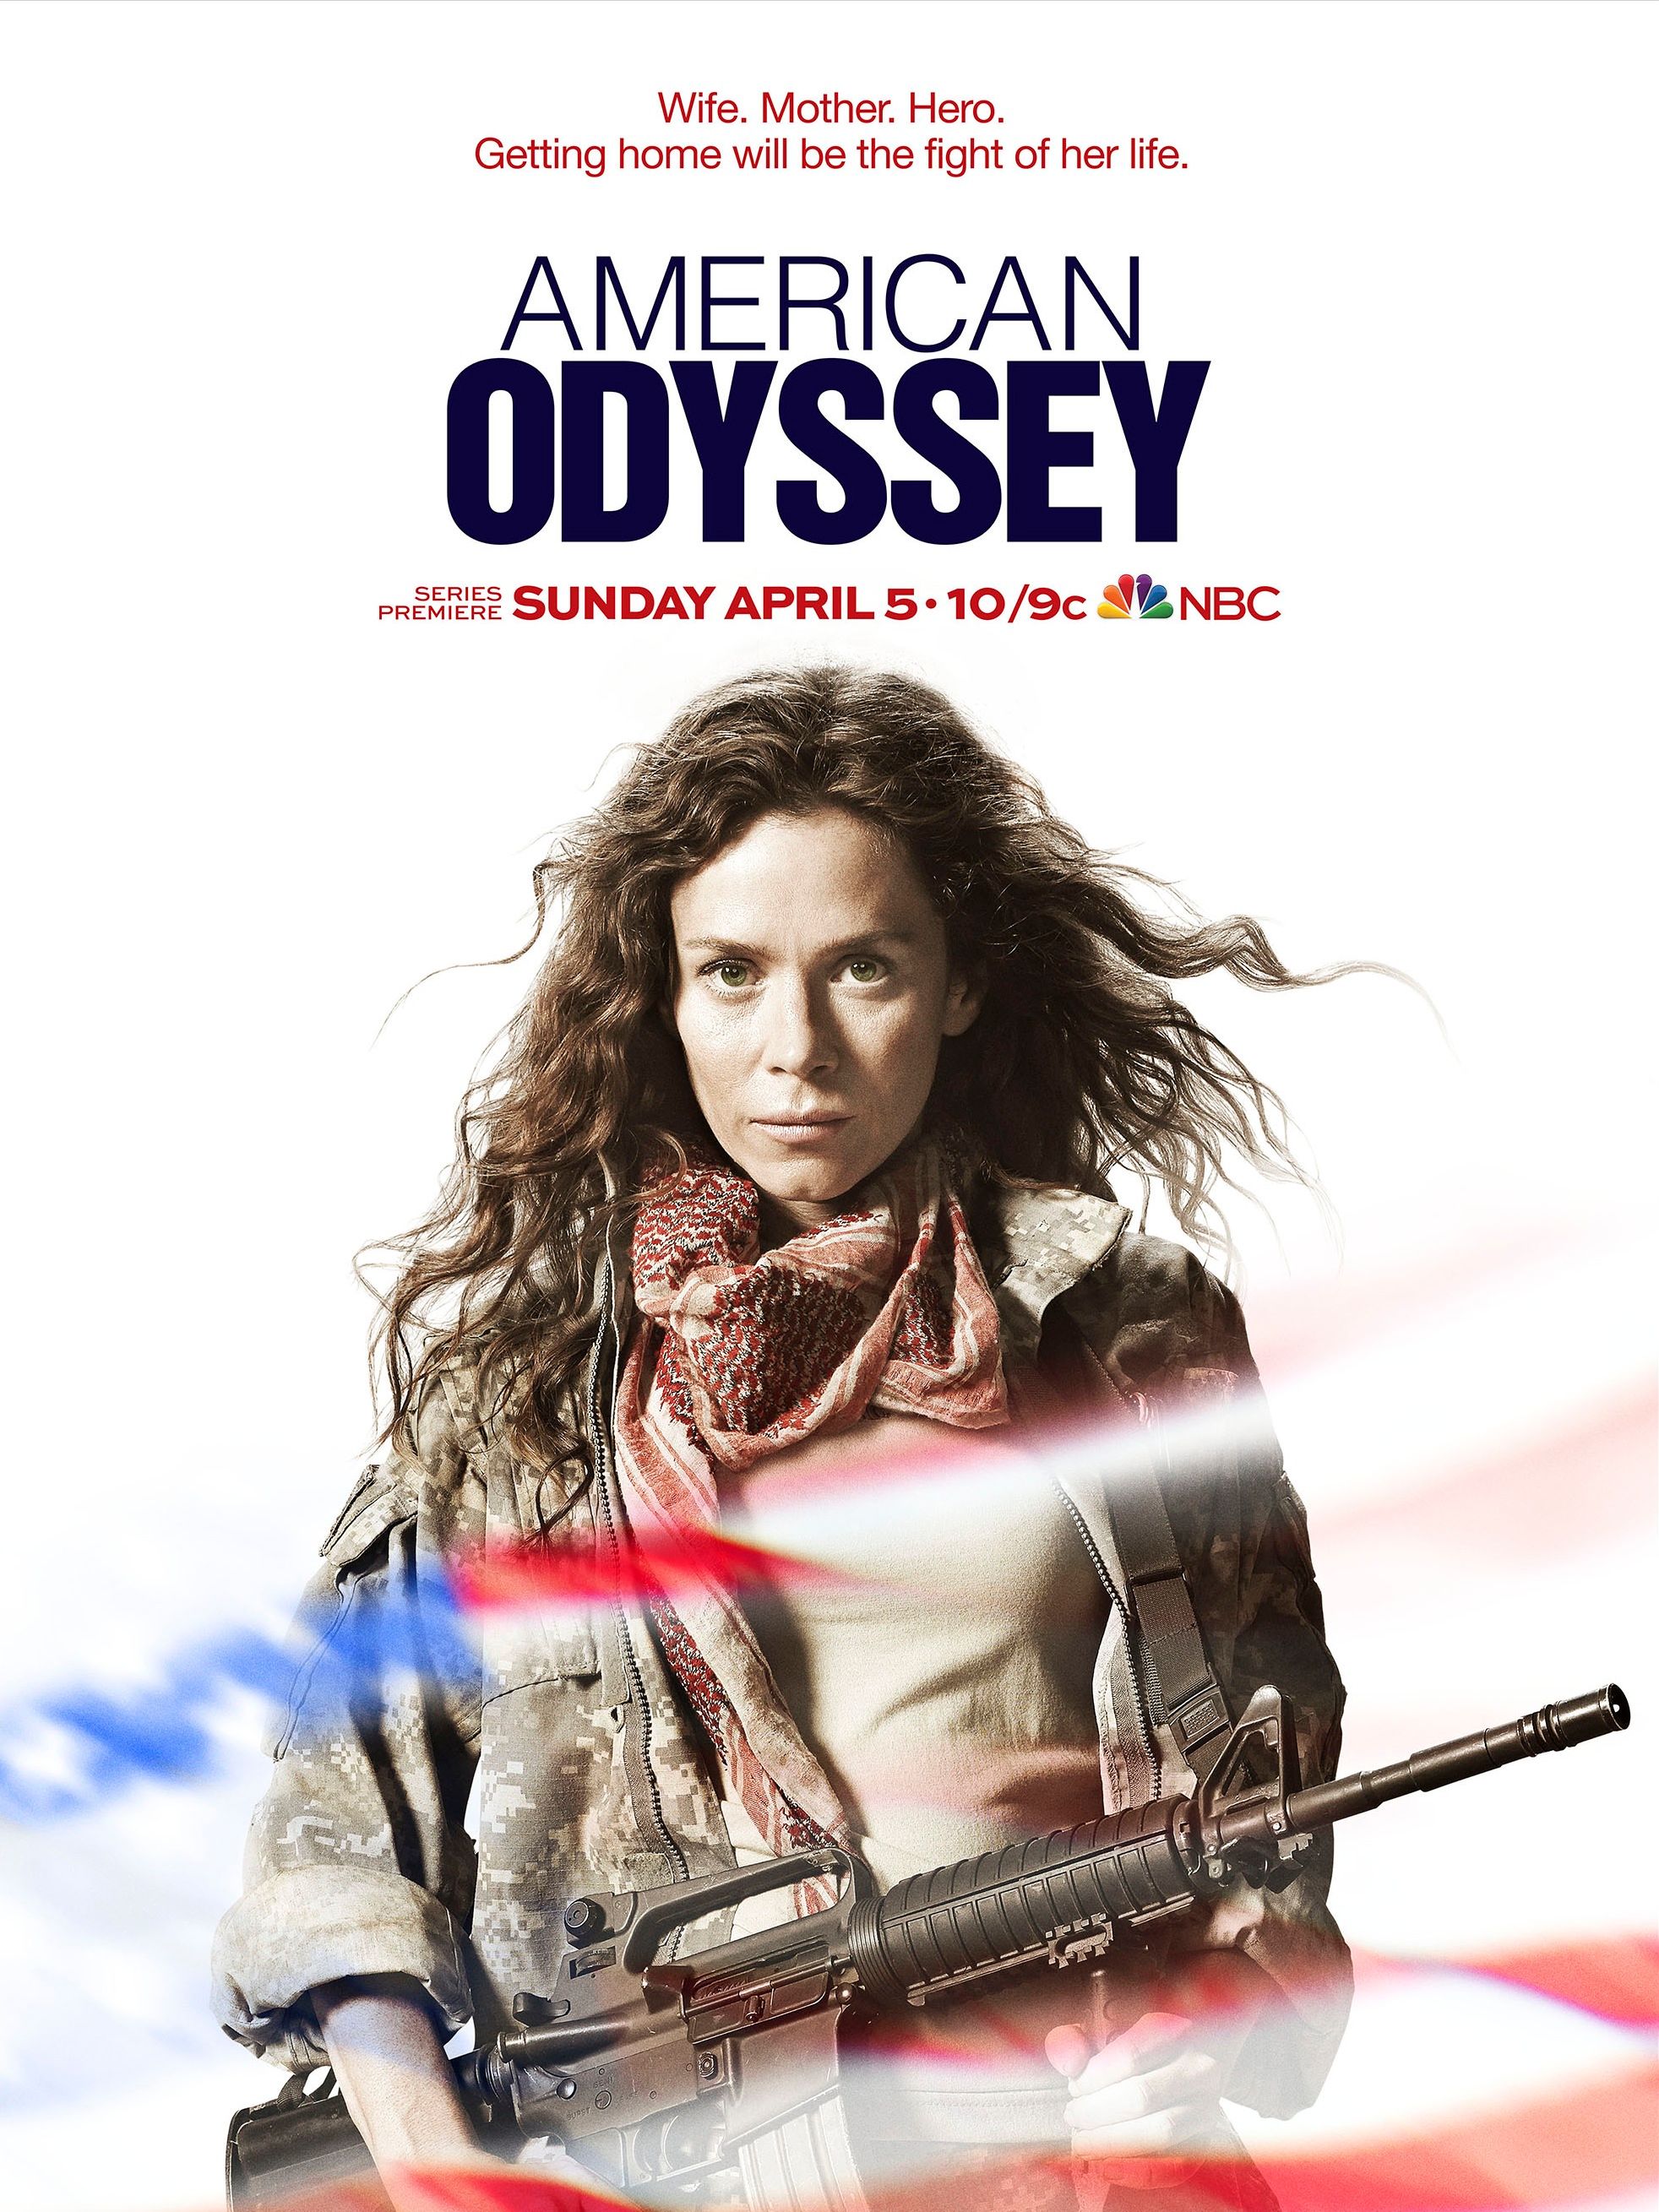 AMERICAN ODYSSEY: Cast and Creators Tease NBC's New Conspiracy Thriller | Collider